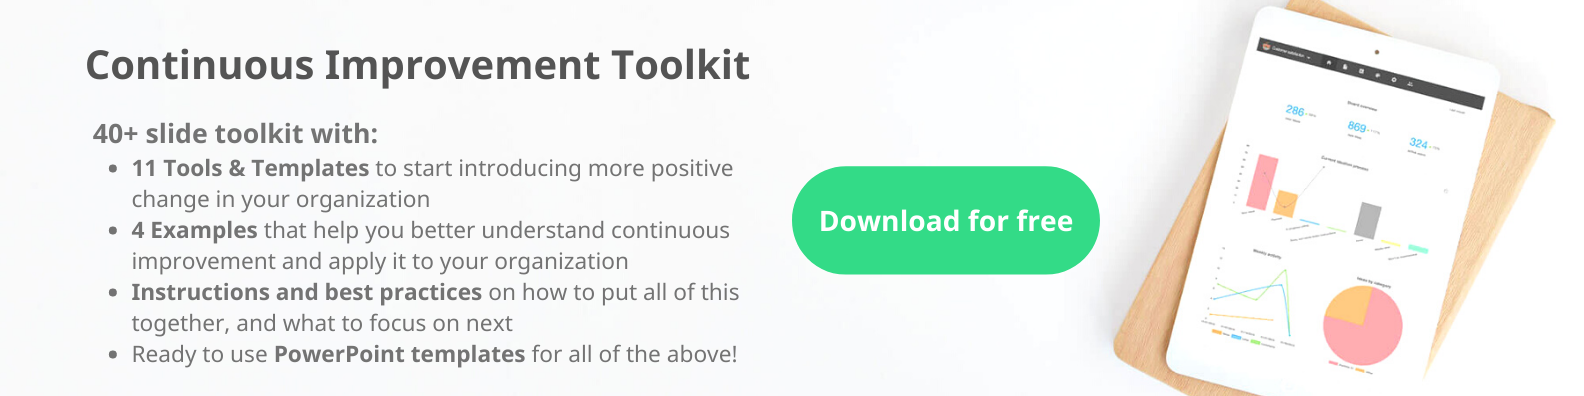 Daily Self-Evaluation Template – Continuous Improvement Toolkit